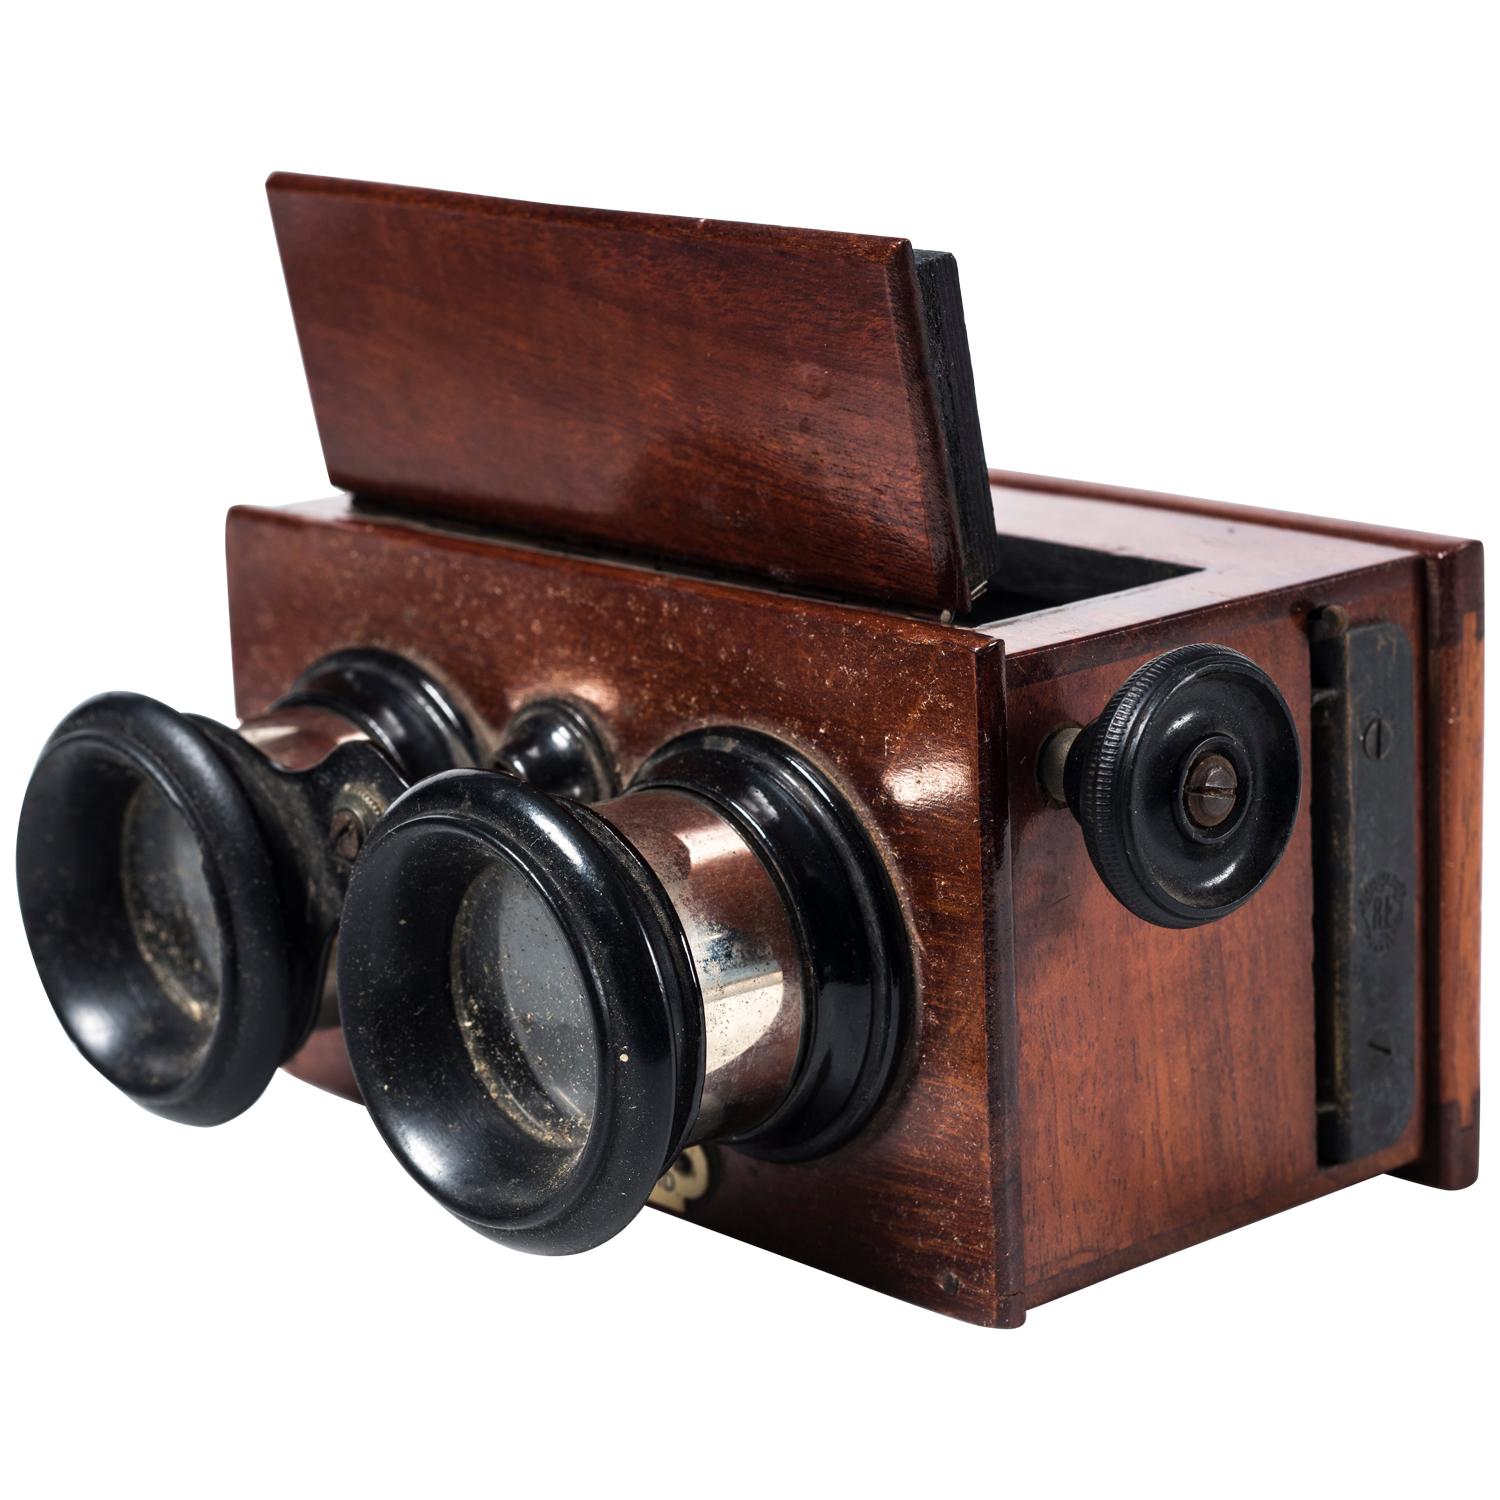 Vintage Stereoscope by Verascope Richard, Early 20th Century